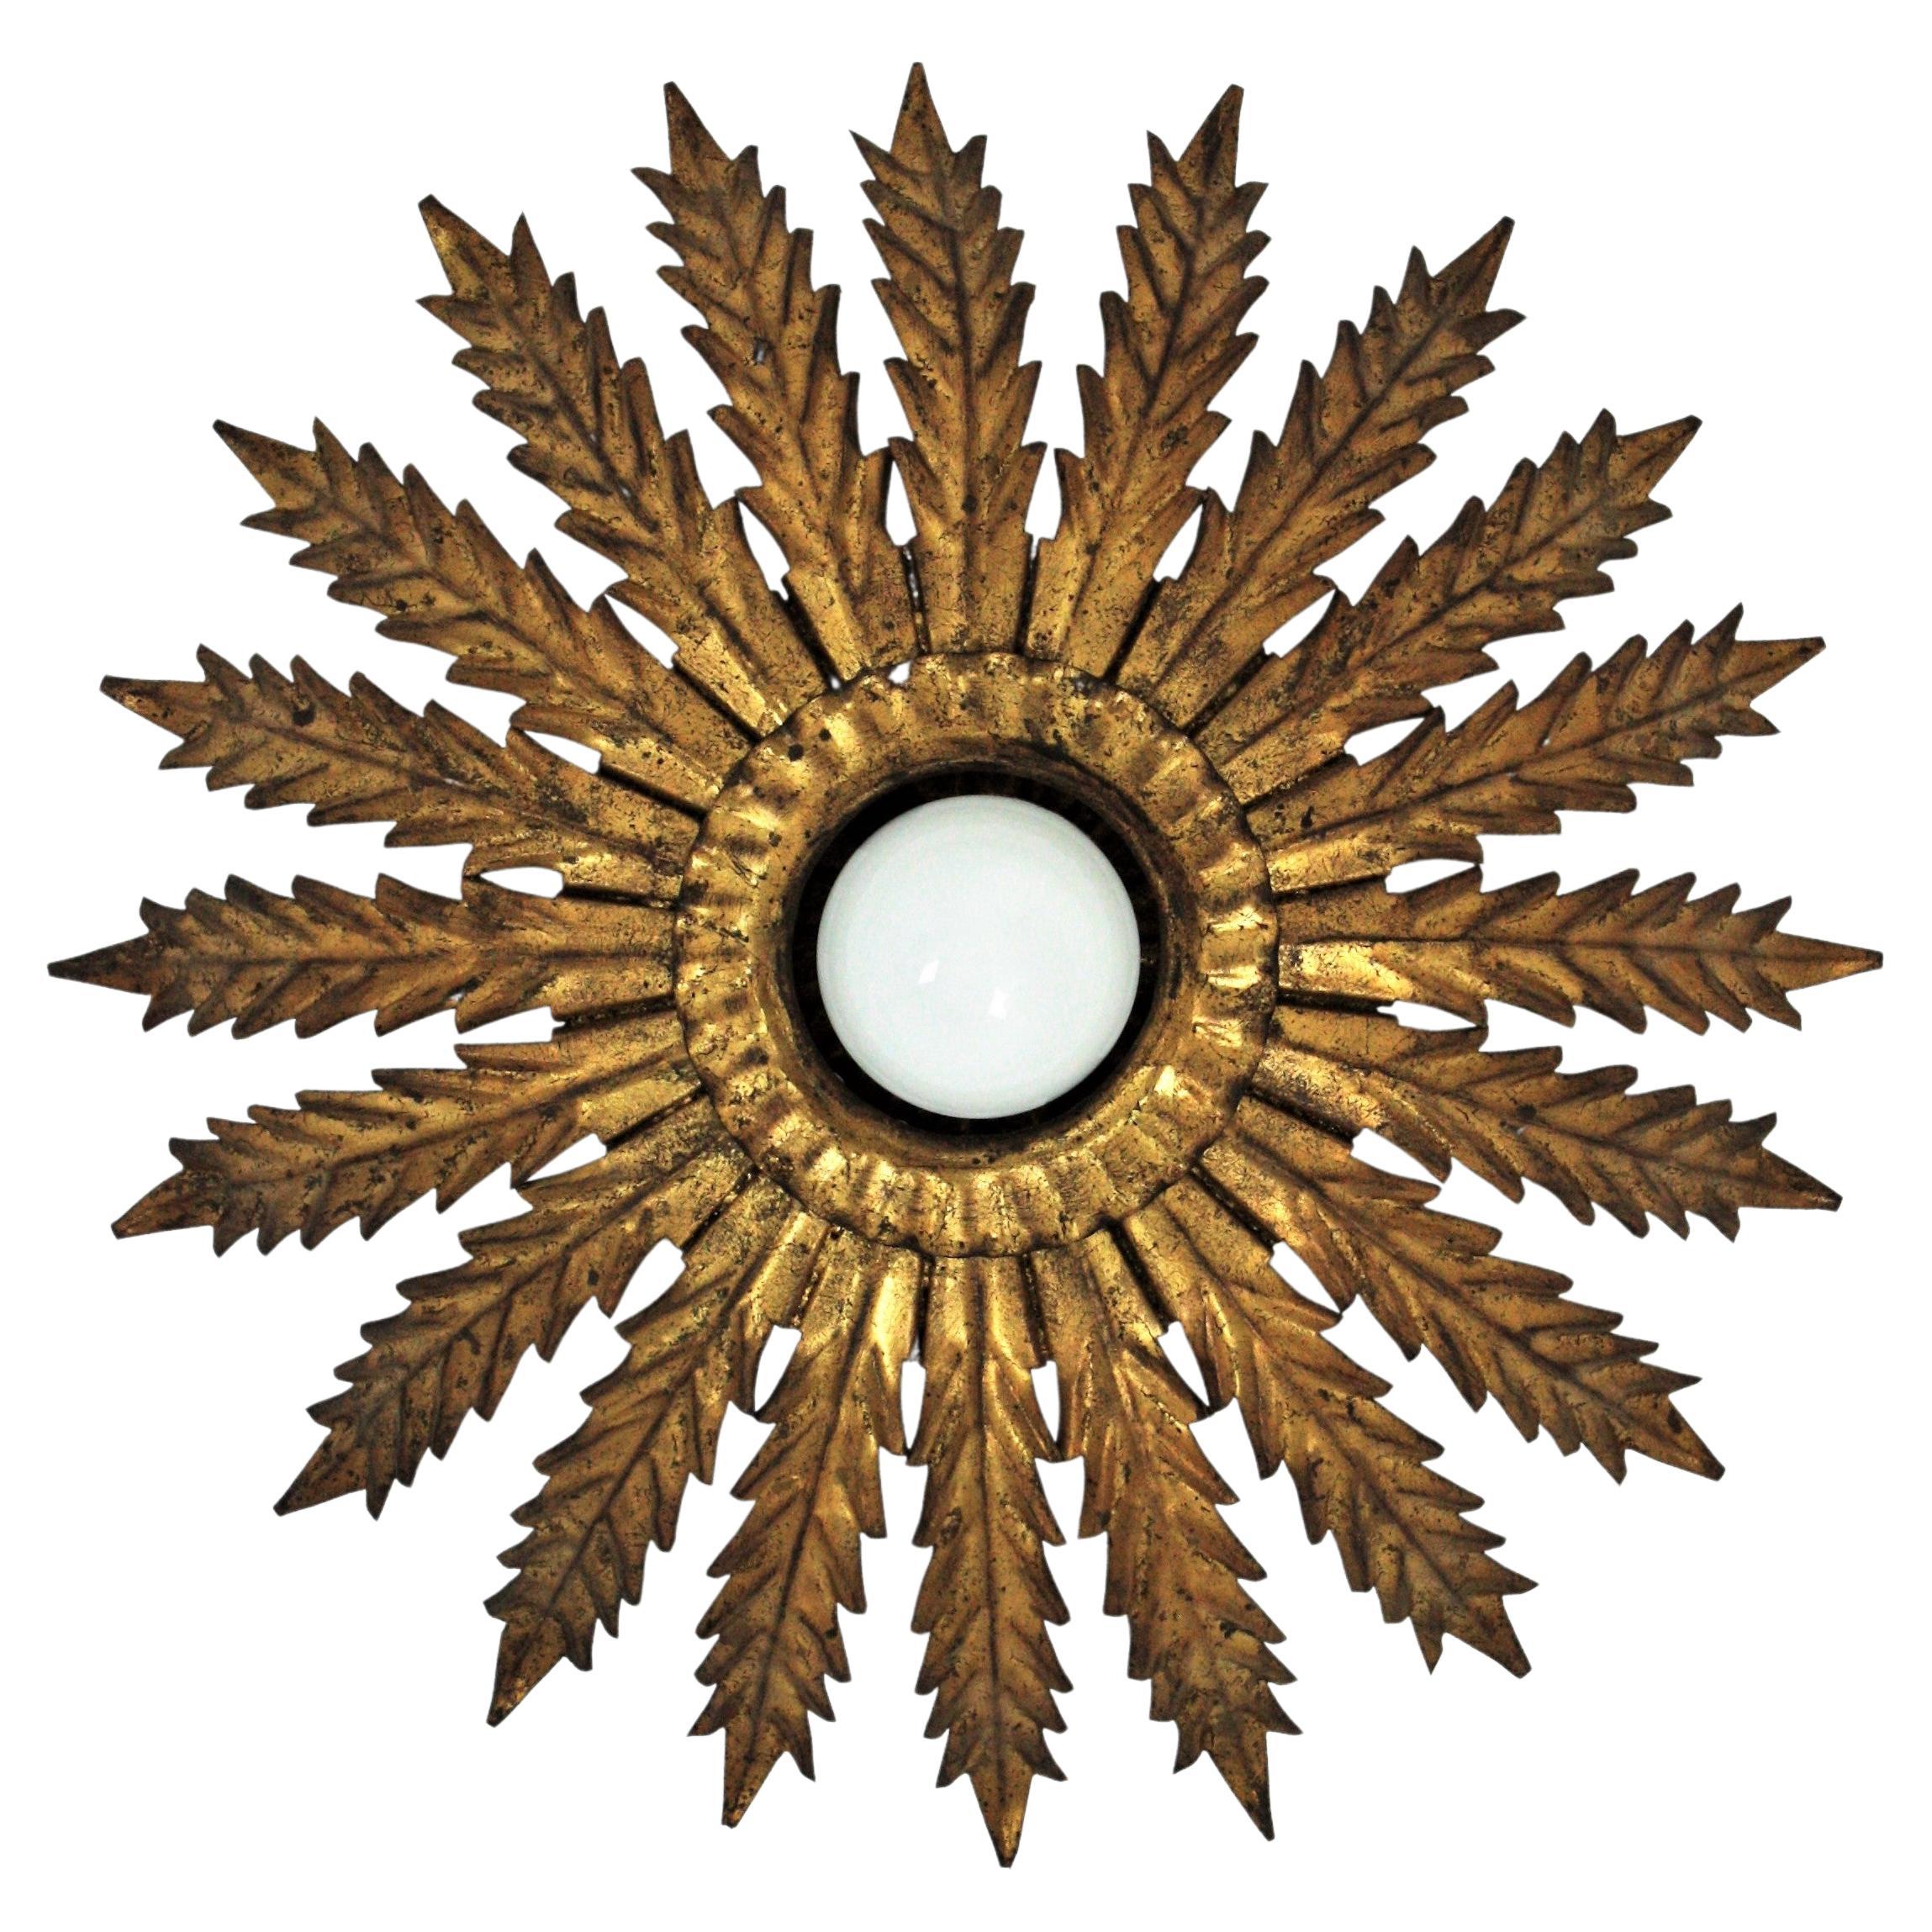 Elegant Hollywood Regency hand-hammered gilt iron sunburst flower light fixture / flush mount, France, 1940s-1950s.
This flush mount ceiling light features a wrought iron structure comprised by gold gilt iron scalloped leaves. The part surrounding